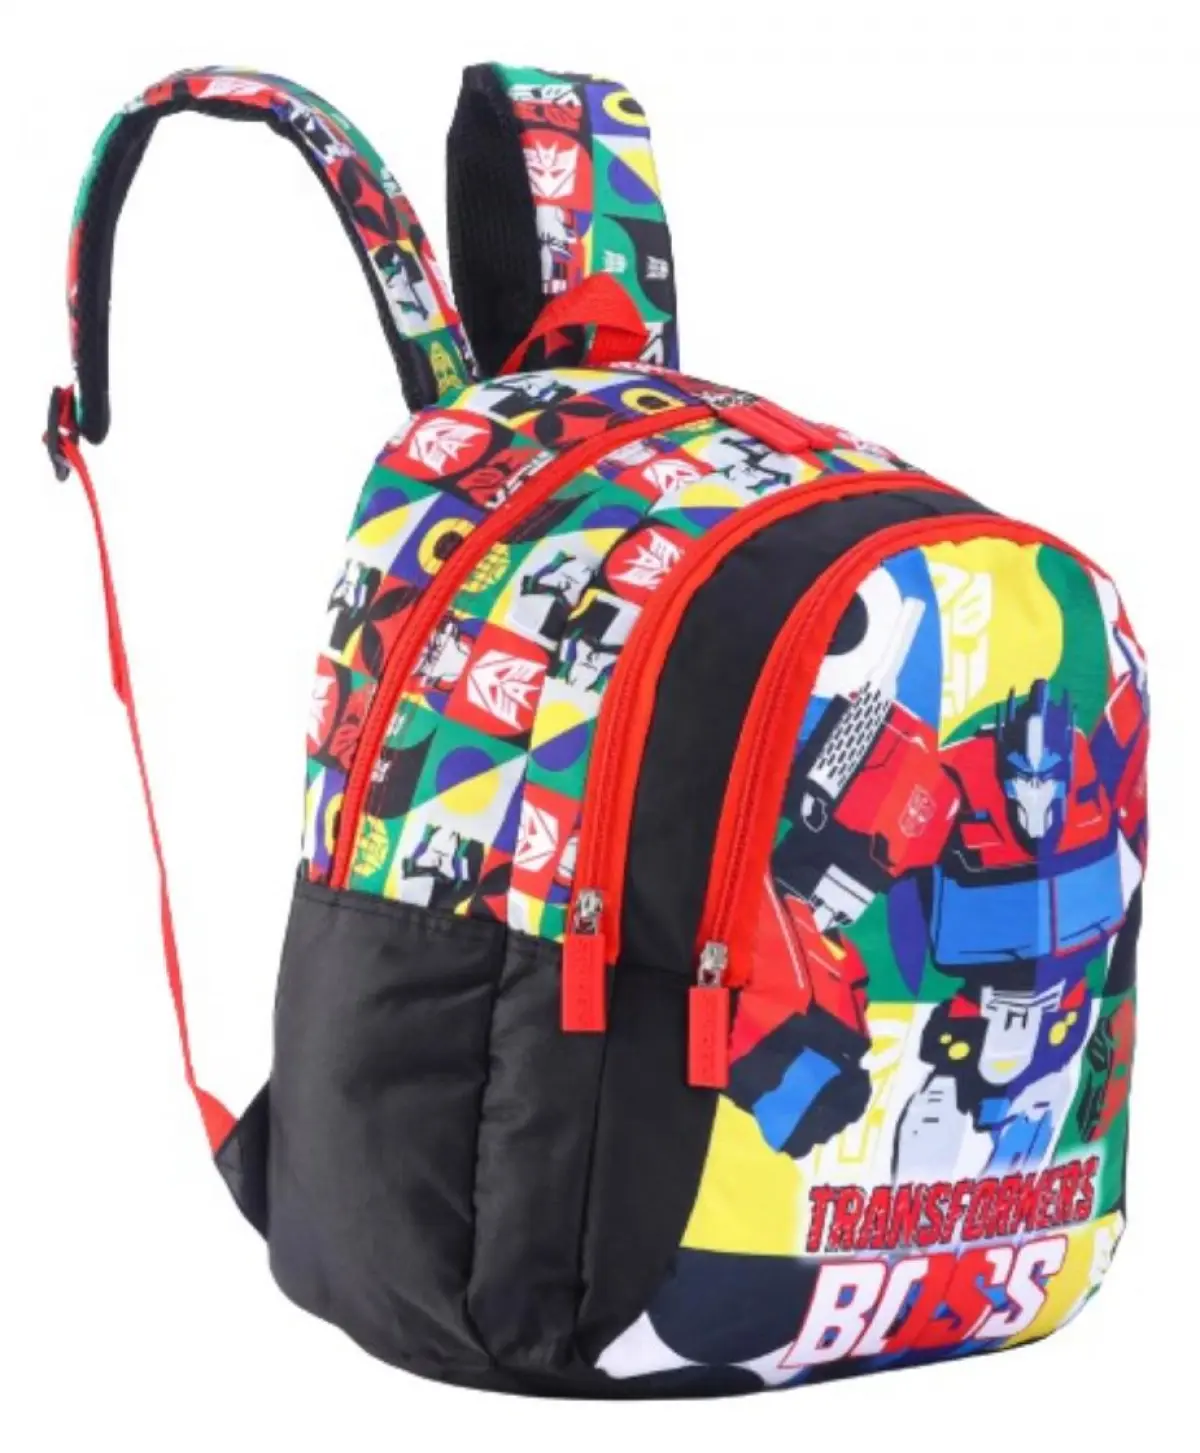 Striders 16 inches Transformers School Bag Roll Out to School in Transformers Fashion Multicolour For Kids Ages 6Y+